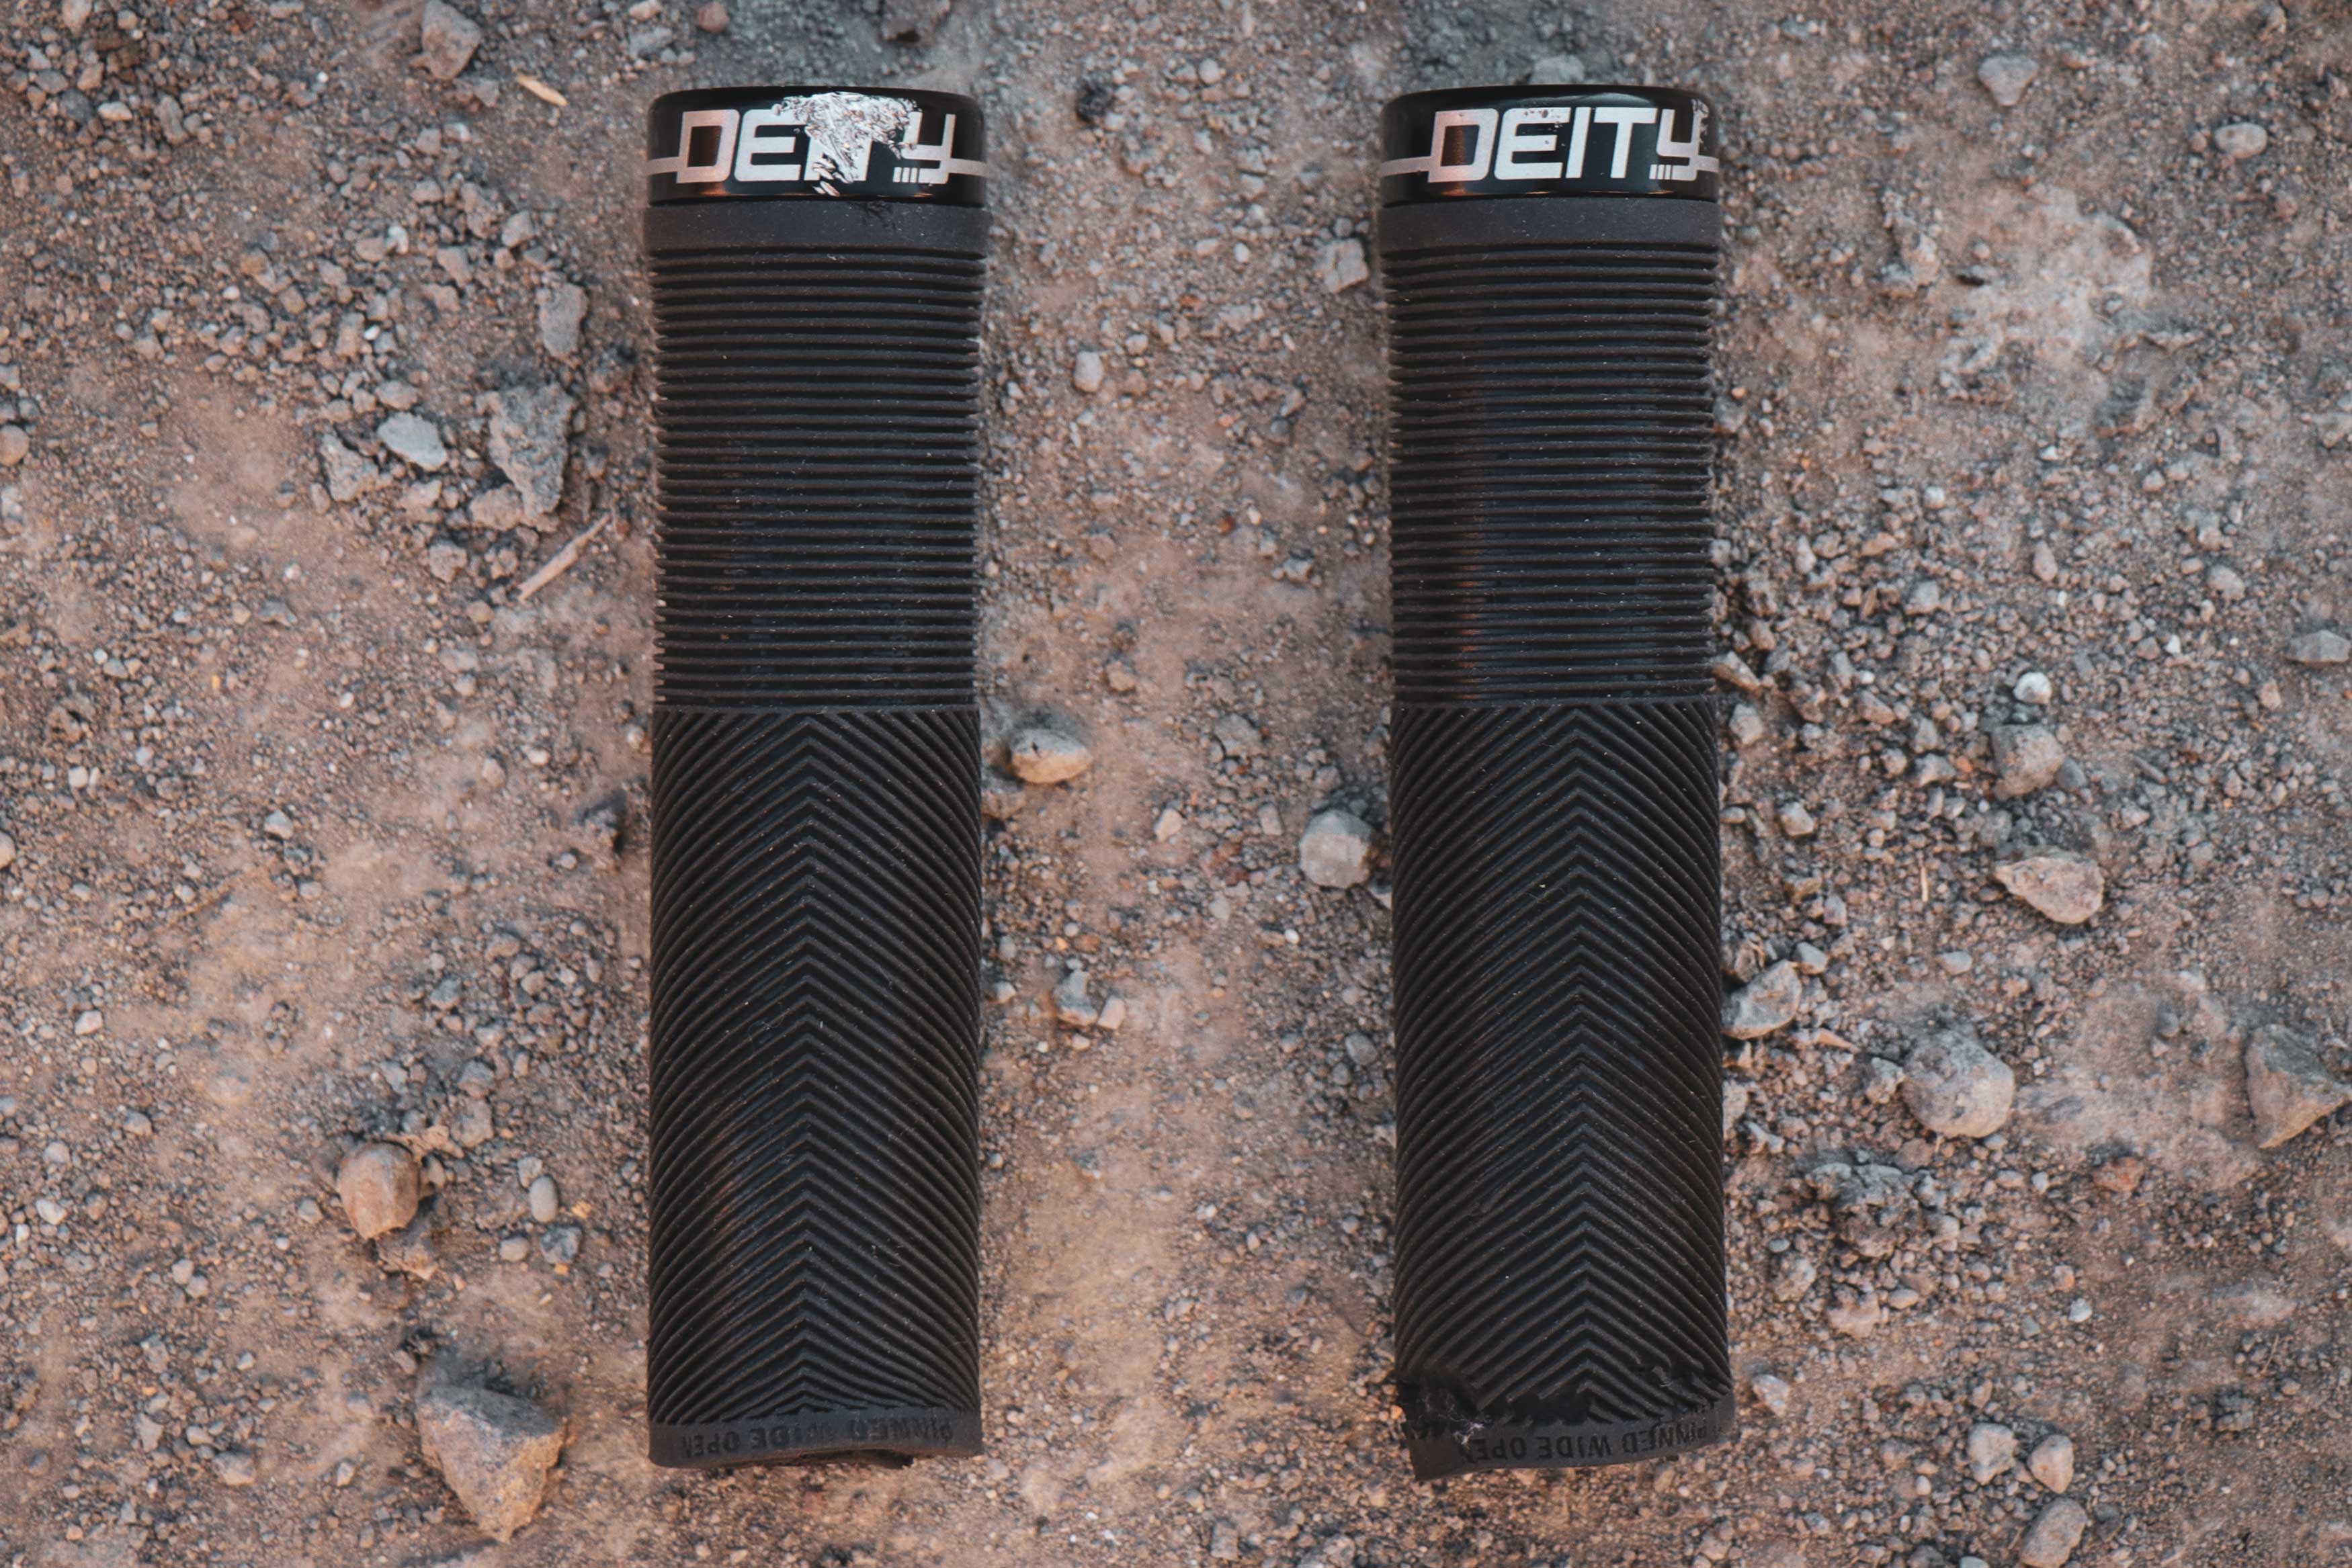 Review: Deity Knuckleduster Grips